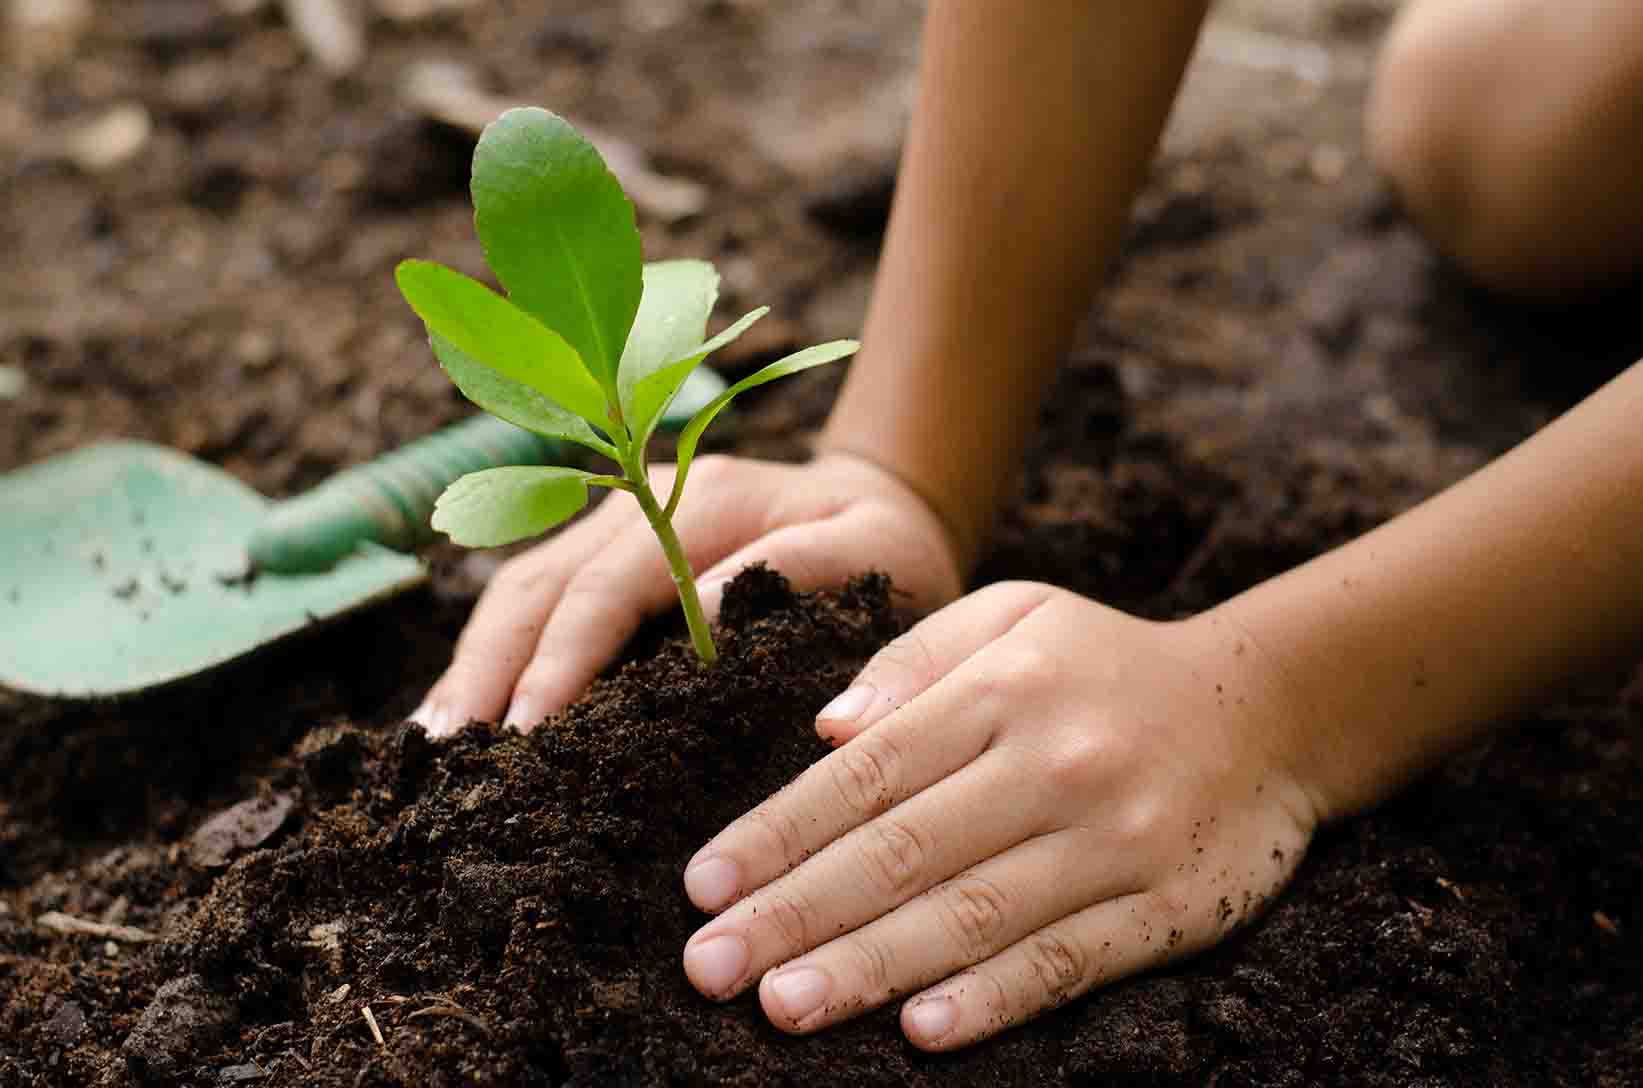 A child's hands plant a green seedling in the earth